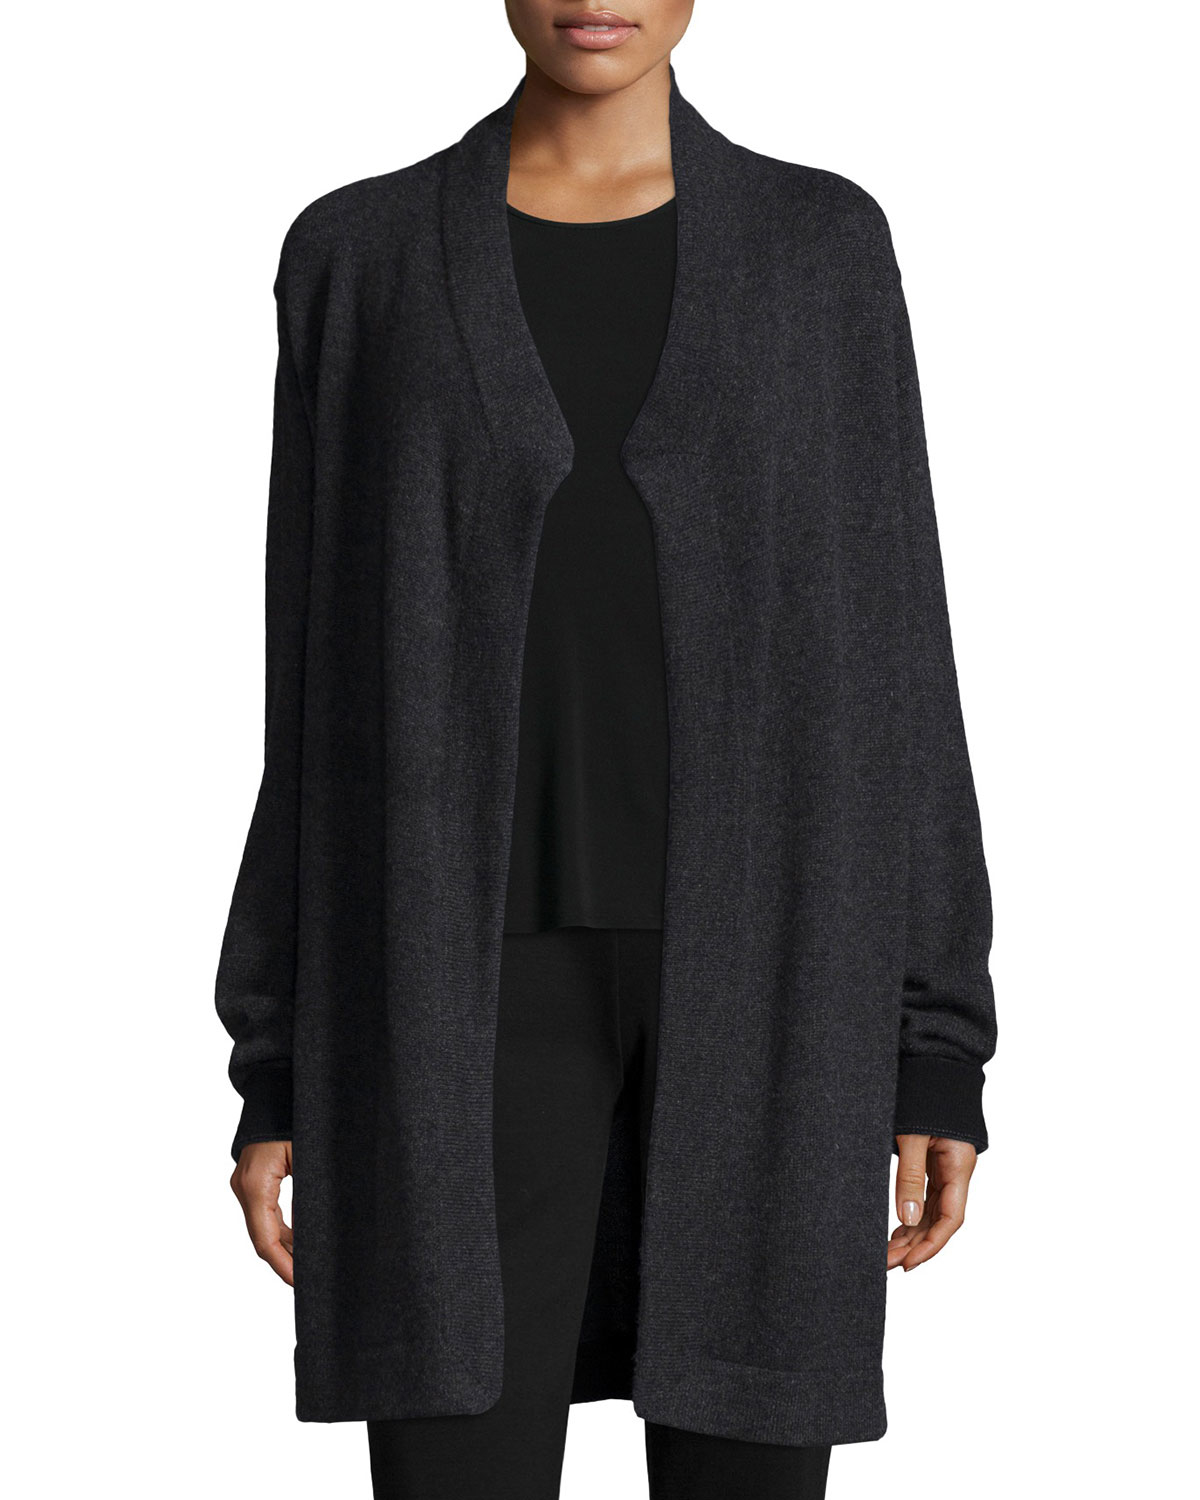 Eileen Fisher Cashmere Draped Mid-length Cardigan in Charcoal/Black ...